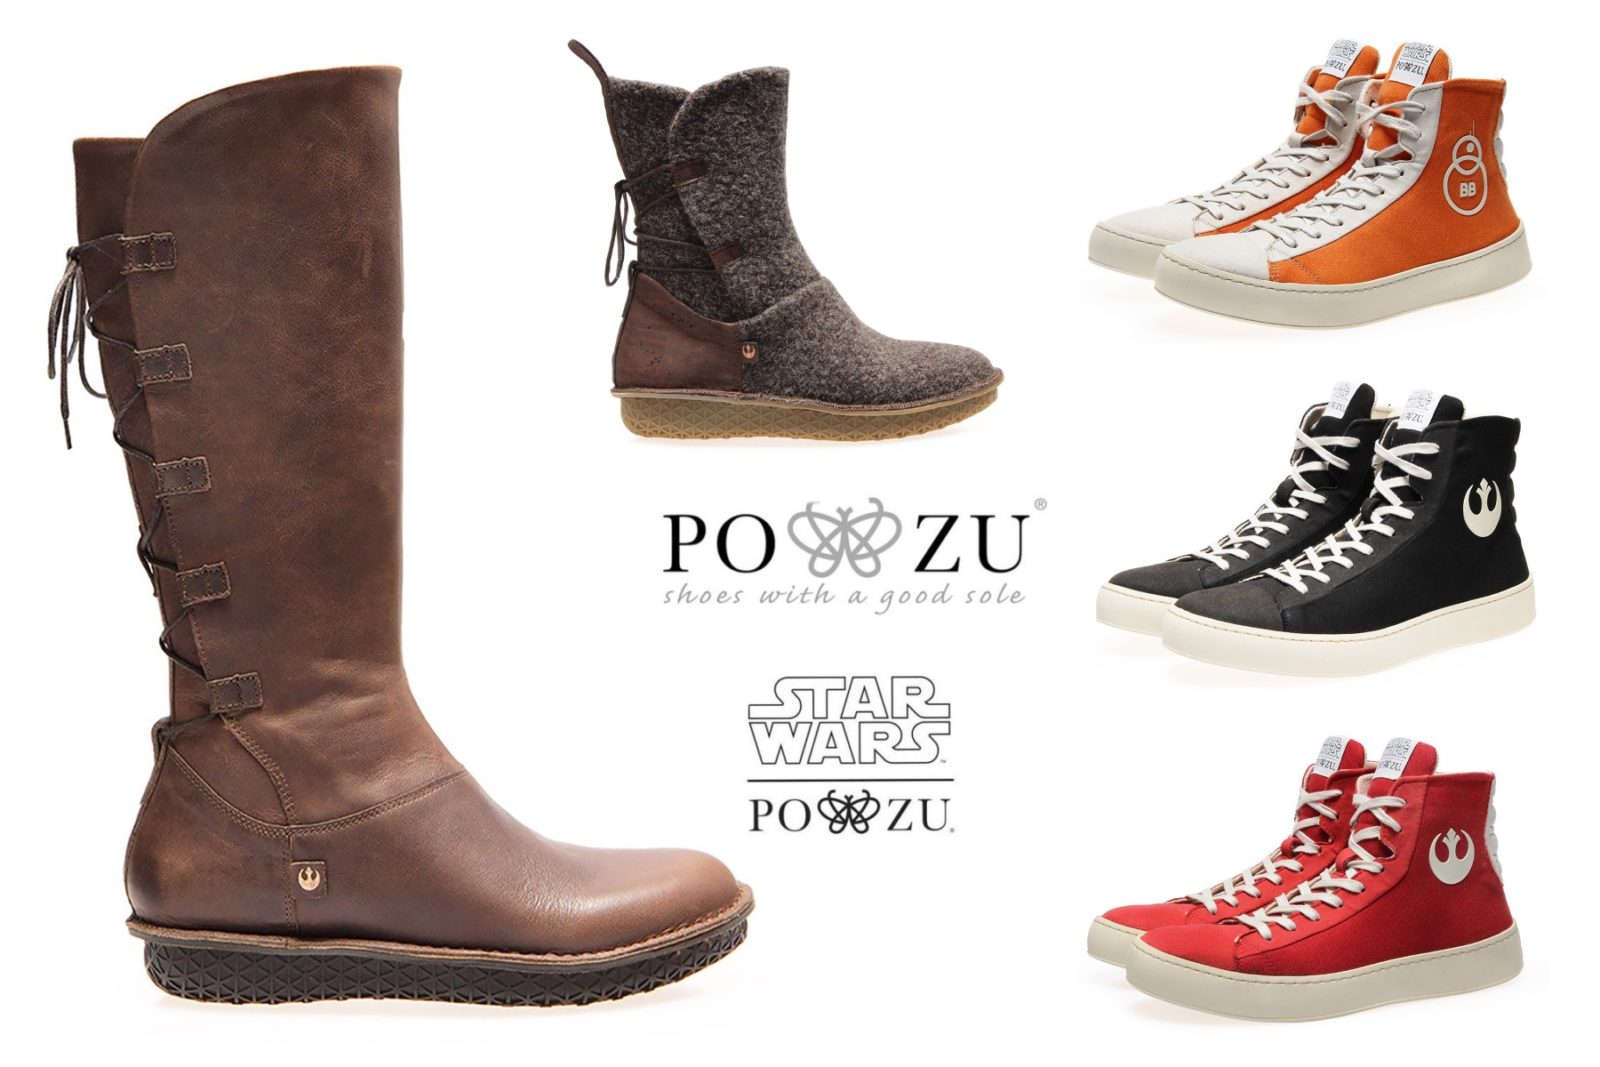 Social Justice Day Sale - Special bundle deals on selected Po-Zu x Star Wars footwear